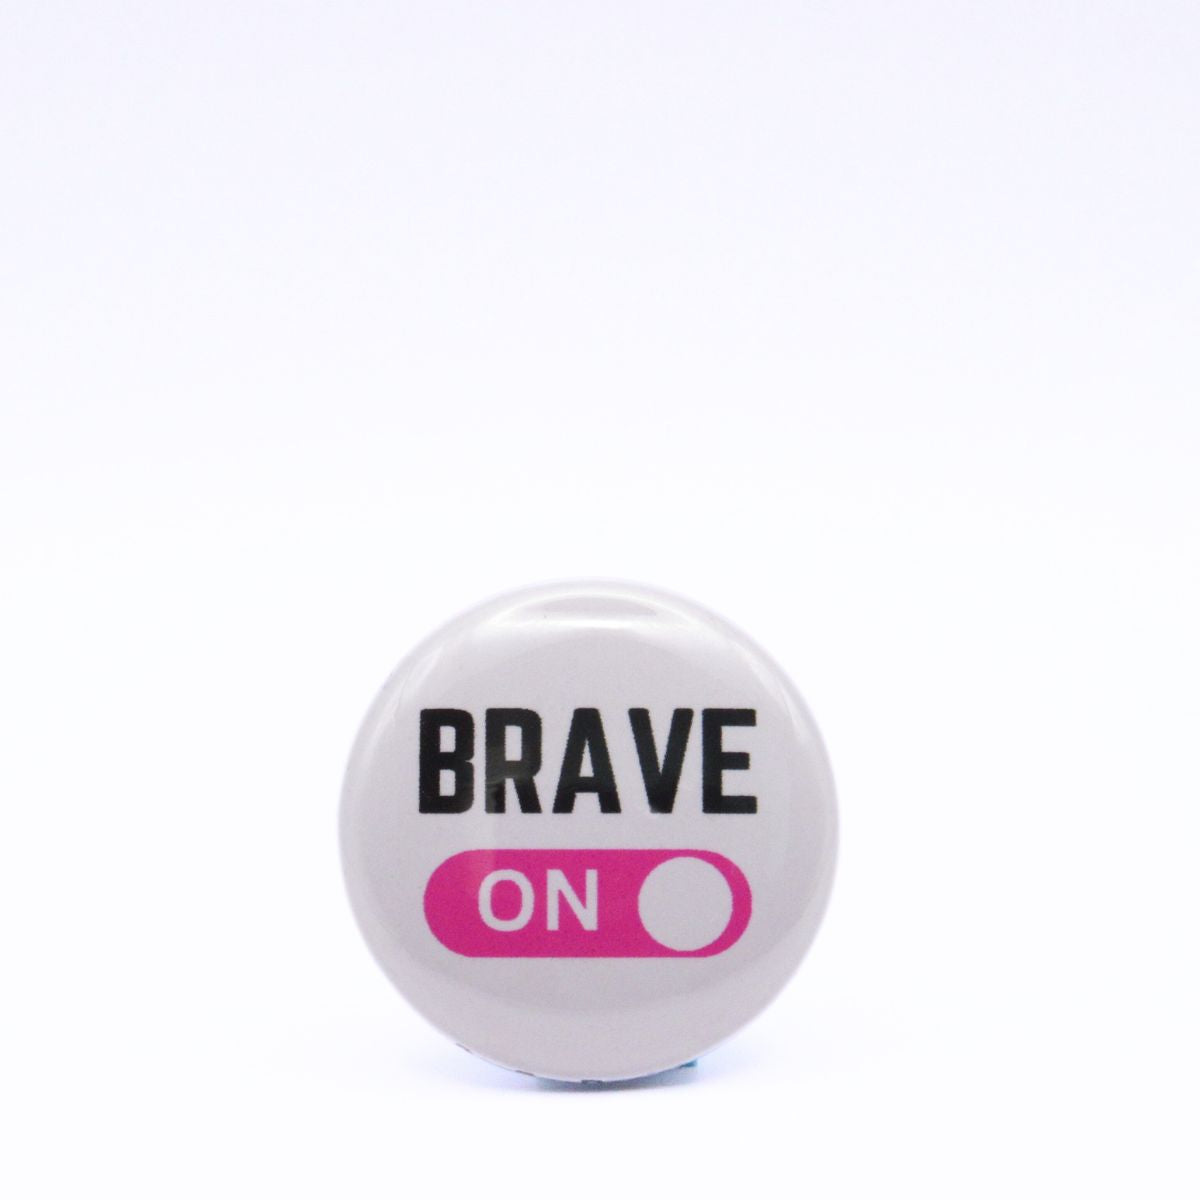 BooBooRoo Pinback Button (i.e. button, badge, pin) displaying brave mode is on. Pink background for mode indicator.